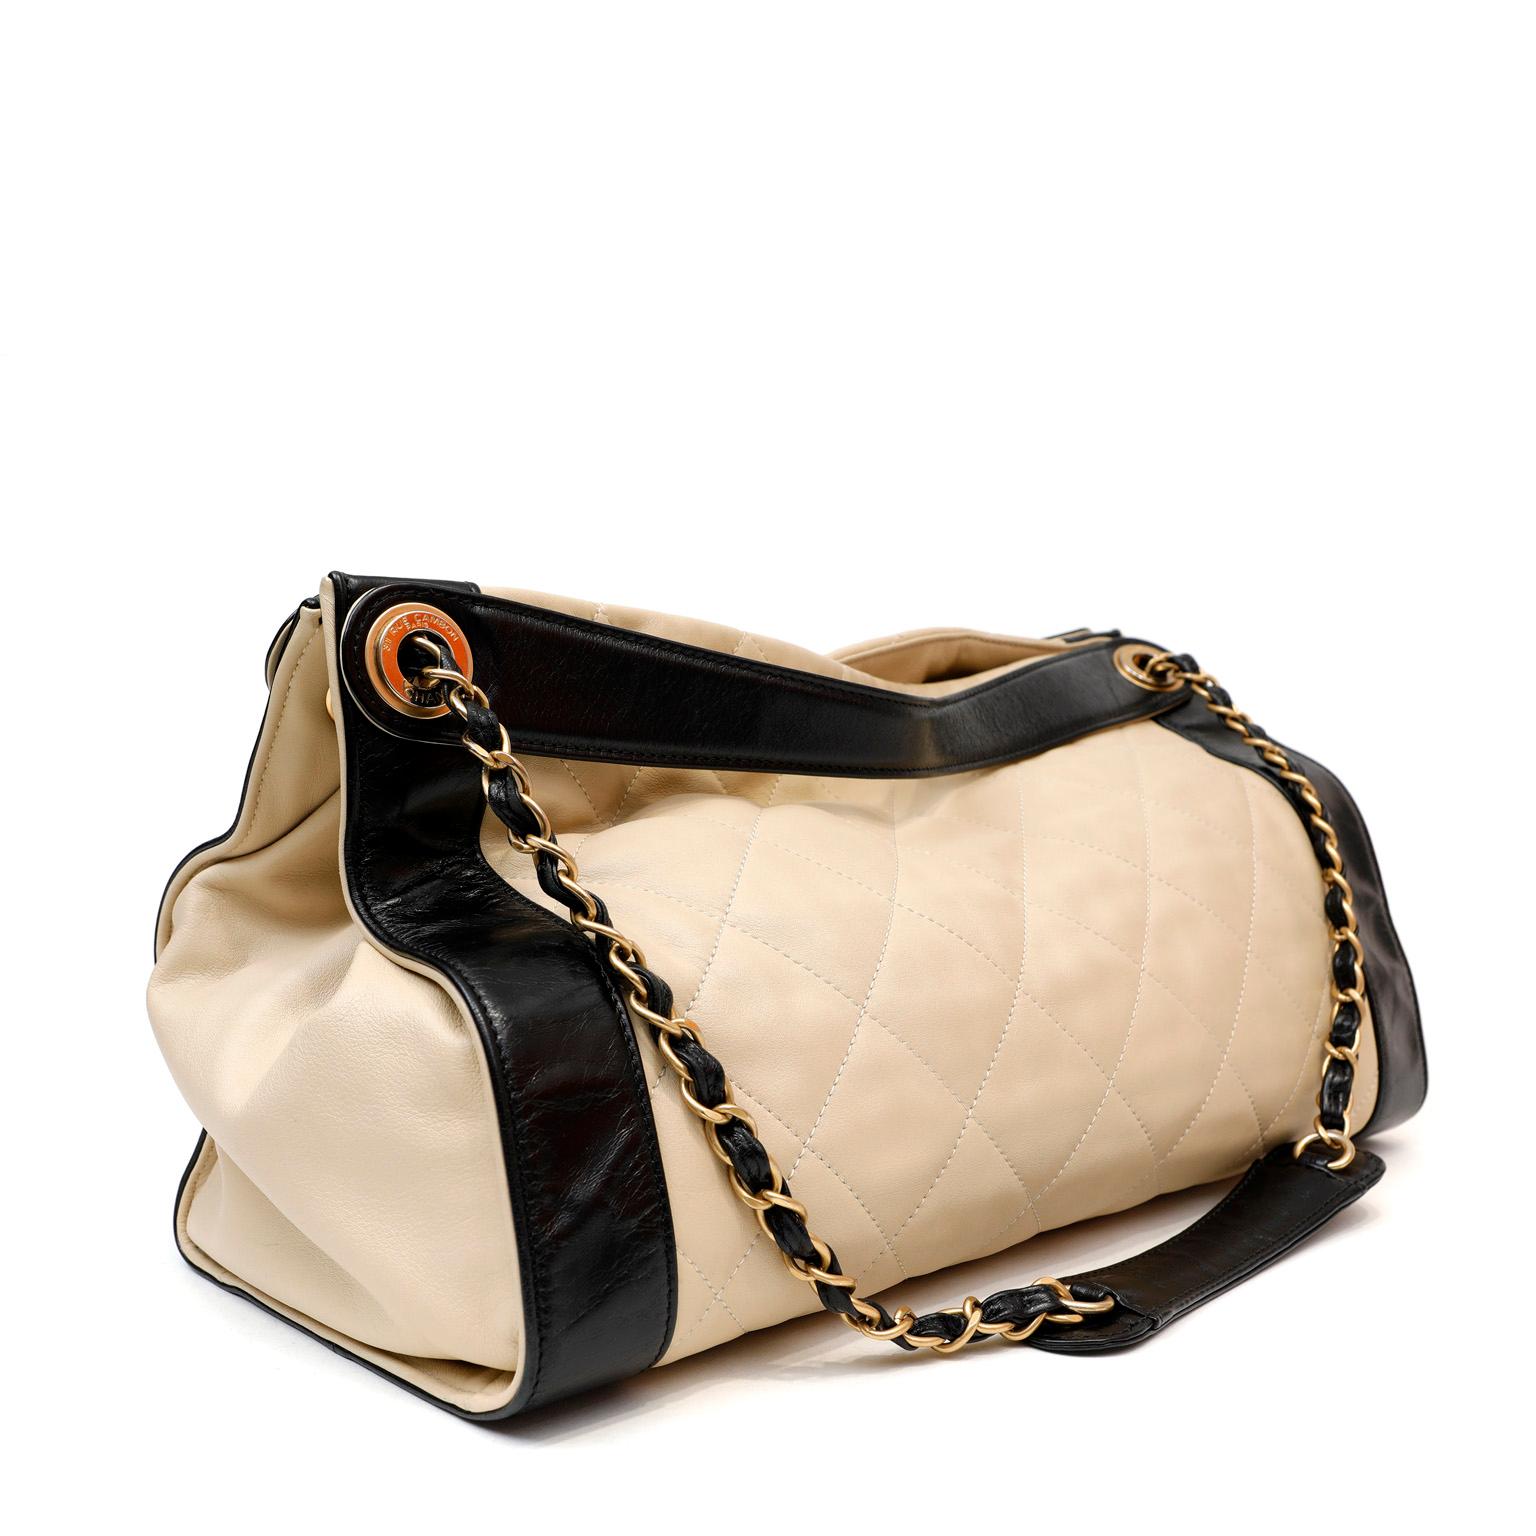 White Chanel Ivory and Black Quilted Leather Tote